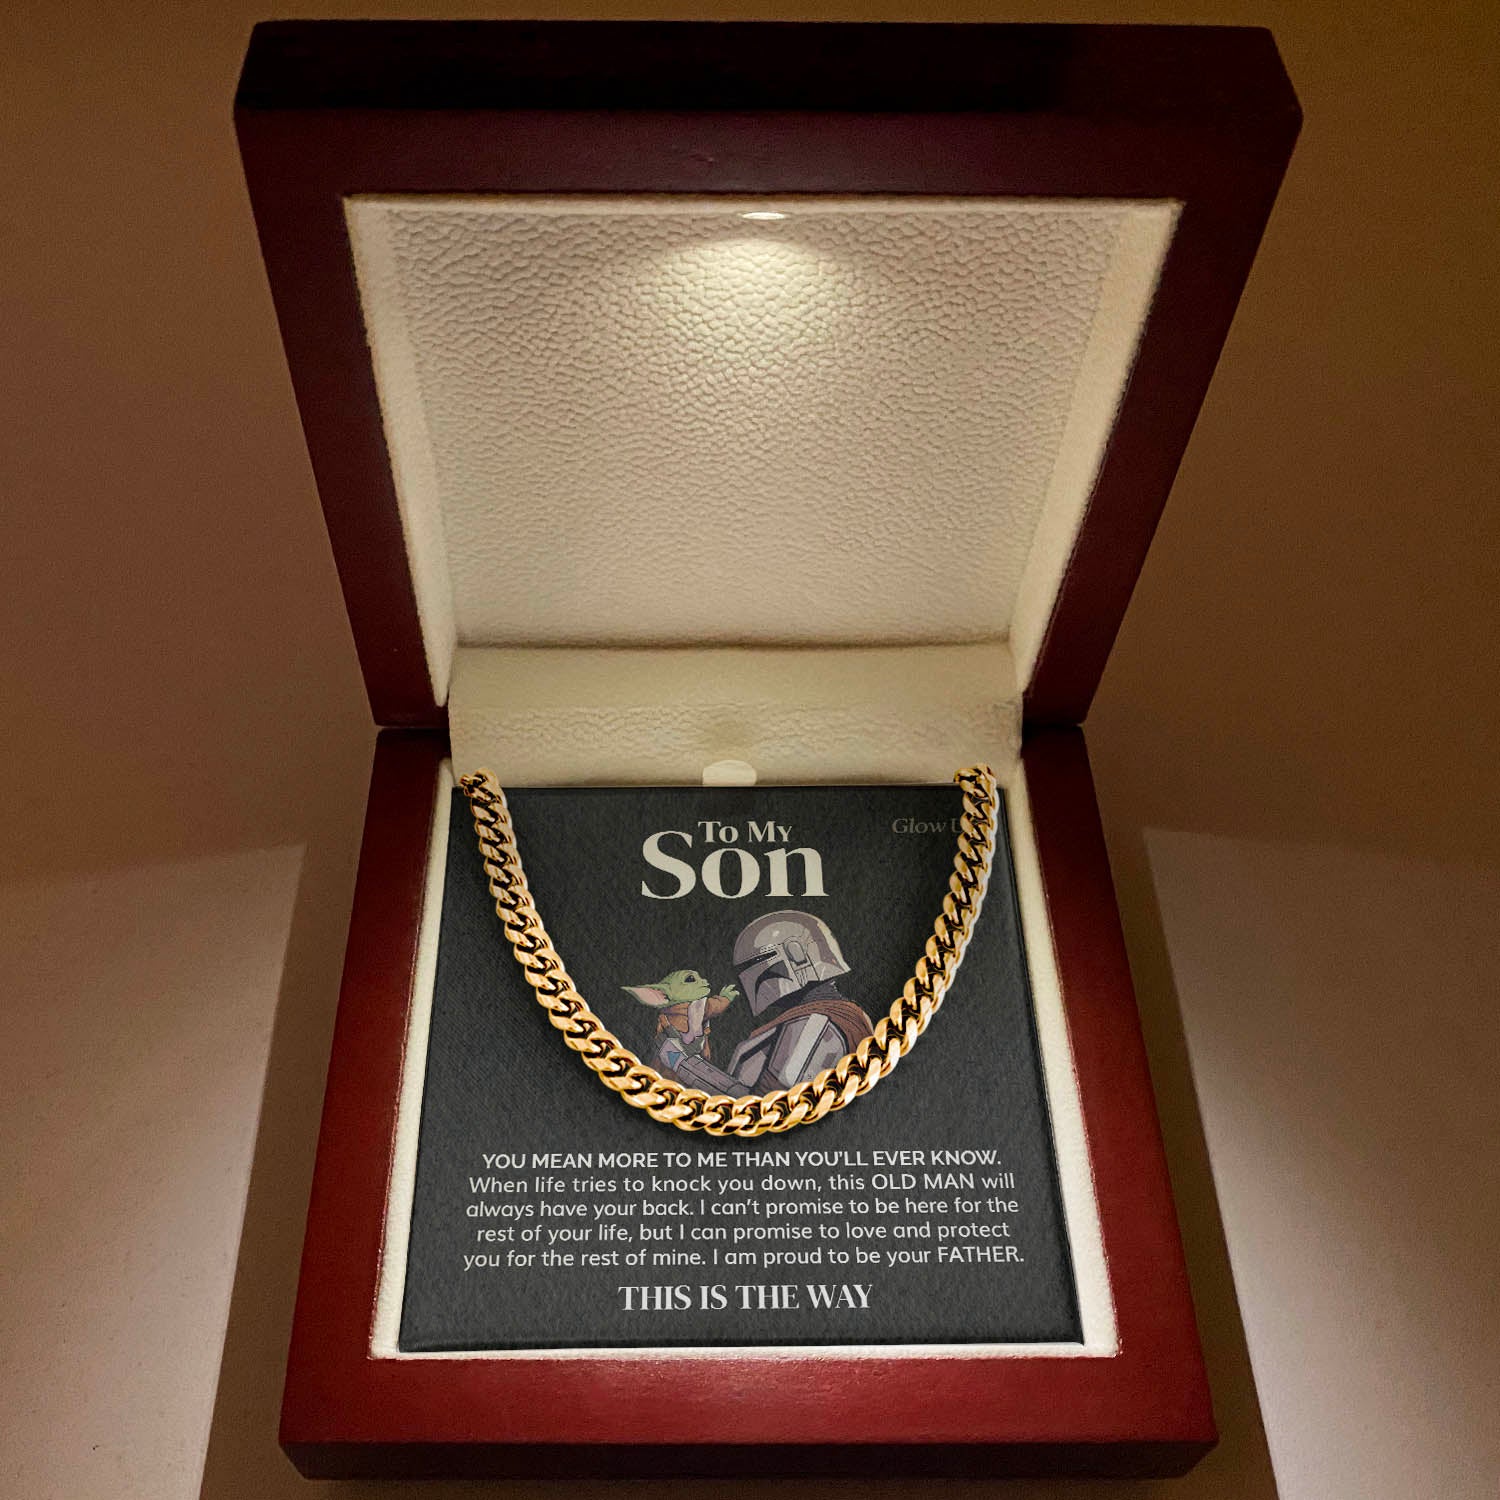 ShineOn Fulfillment Cuban Link Chain 14K Yellow Gold Finish / Luxury Box To my Son - This is the way - Cuban Link Chain